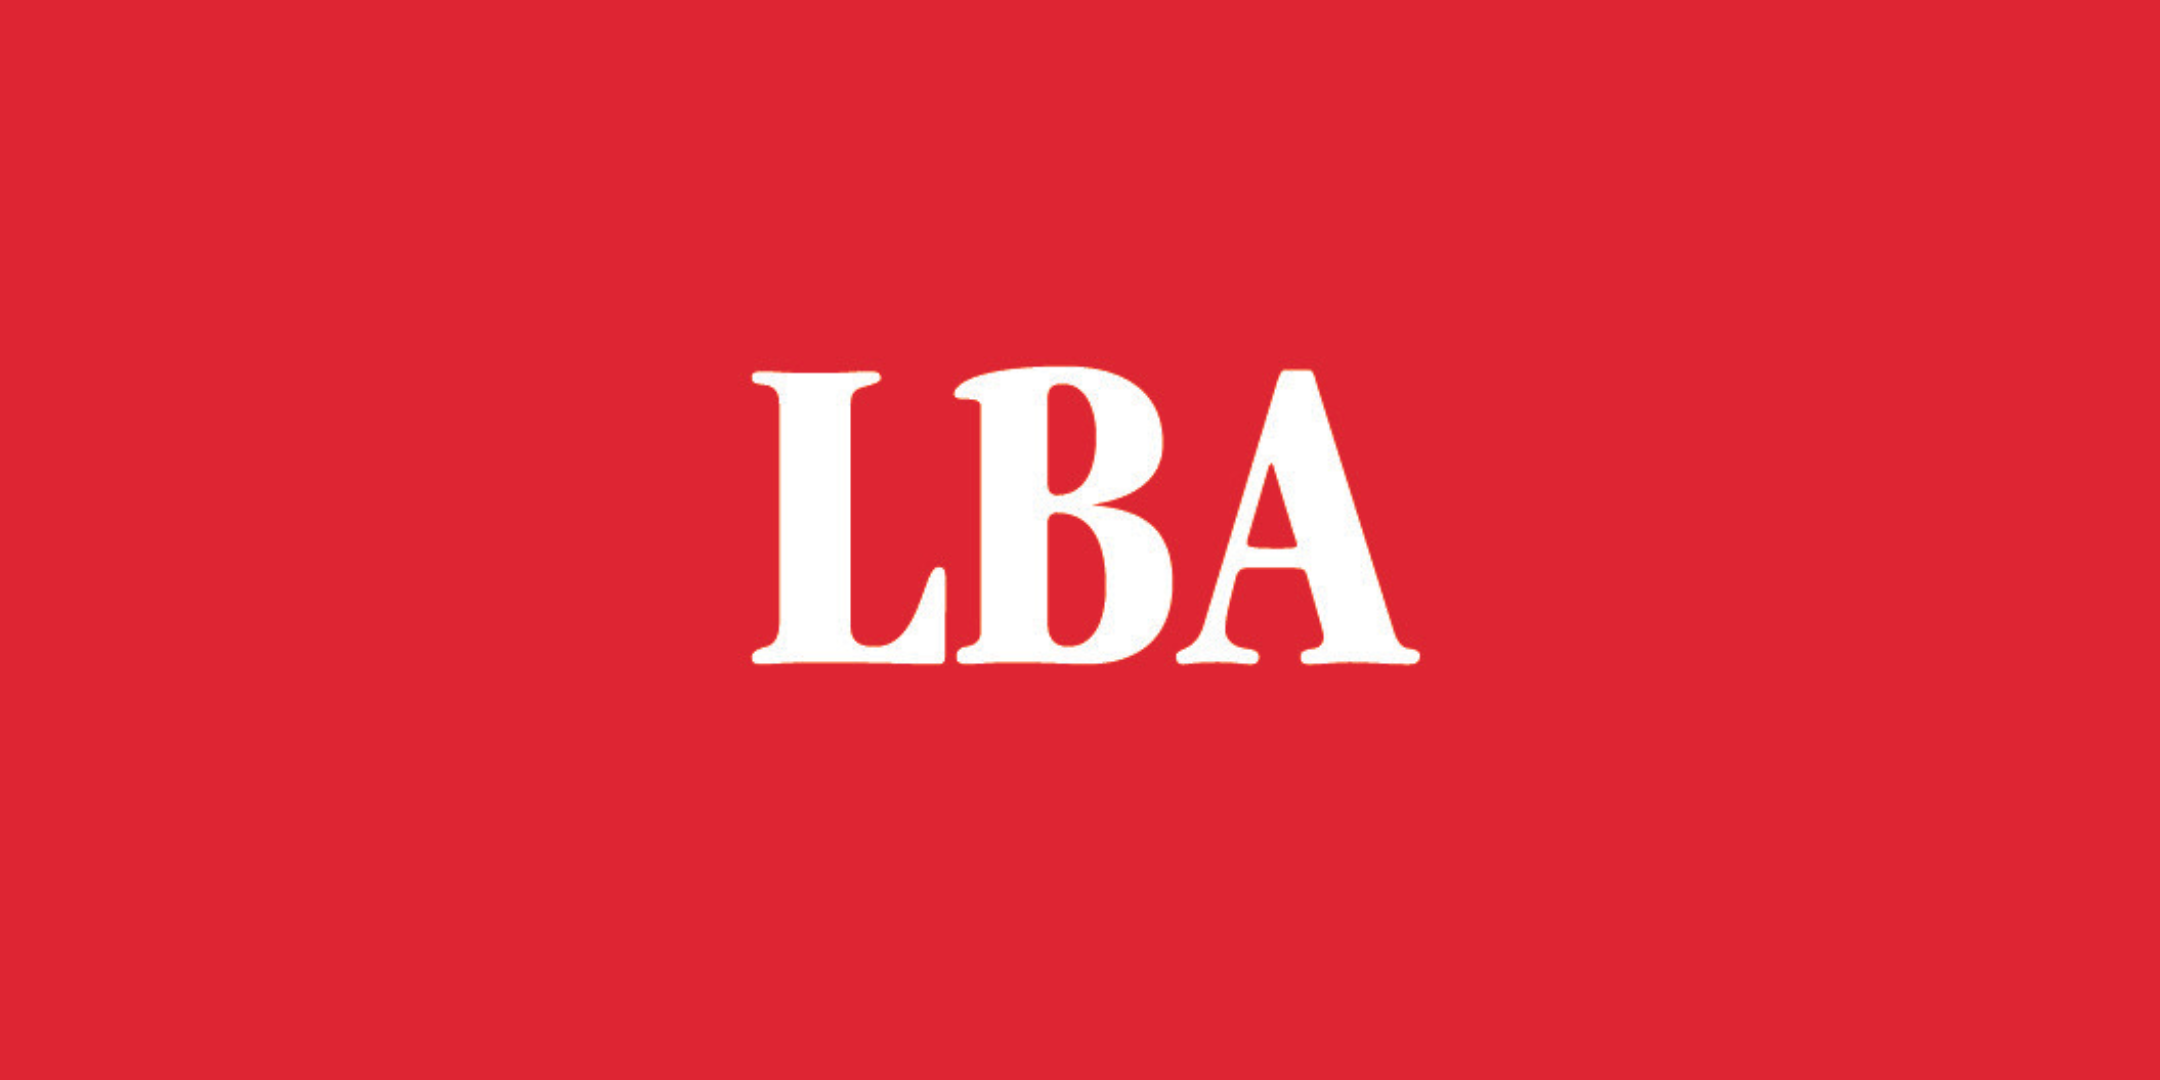 LBA Agency logo - a red background with captial LBA letters.